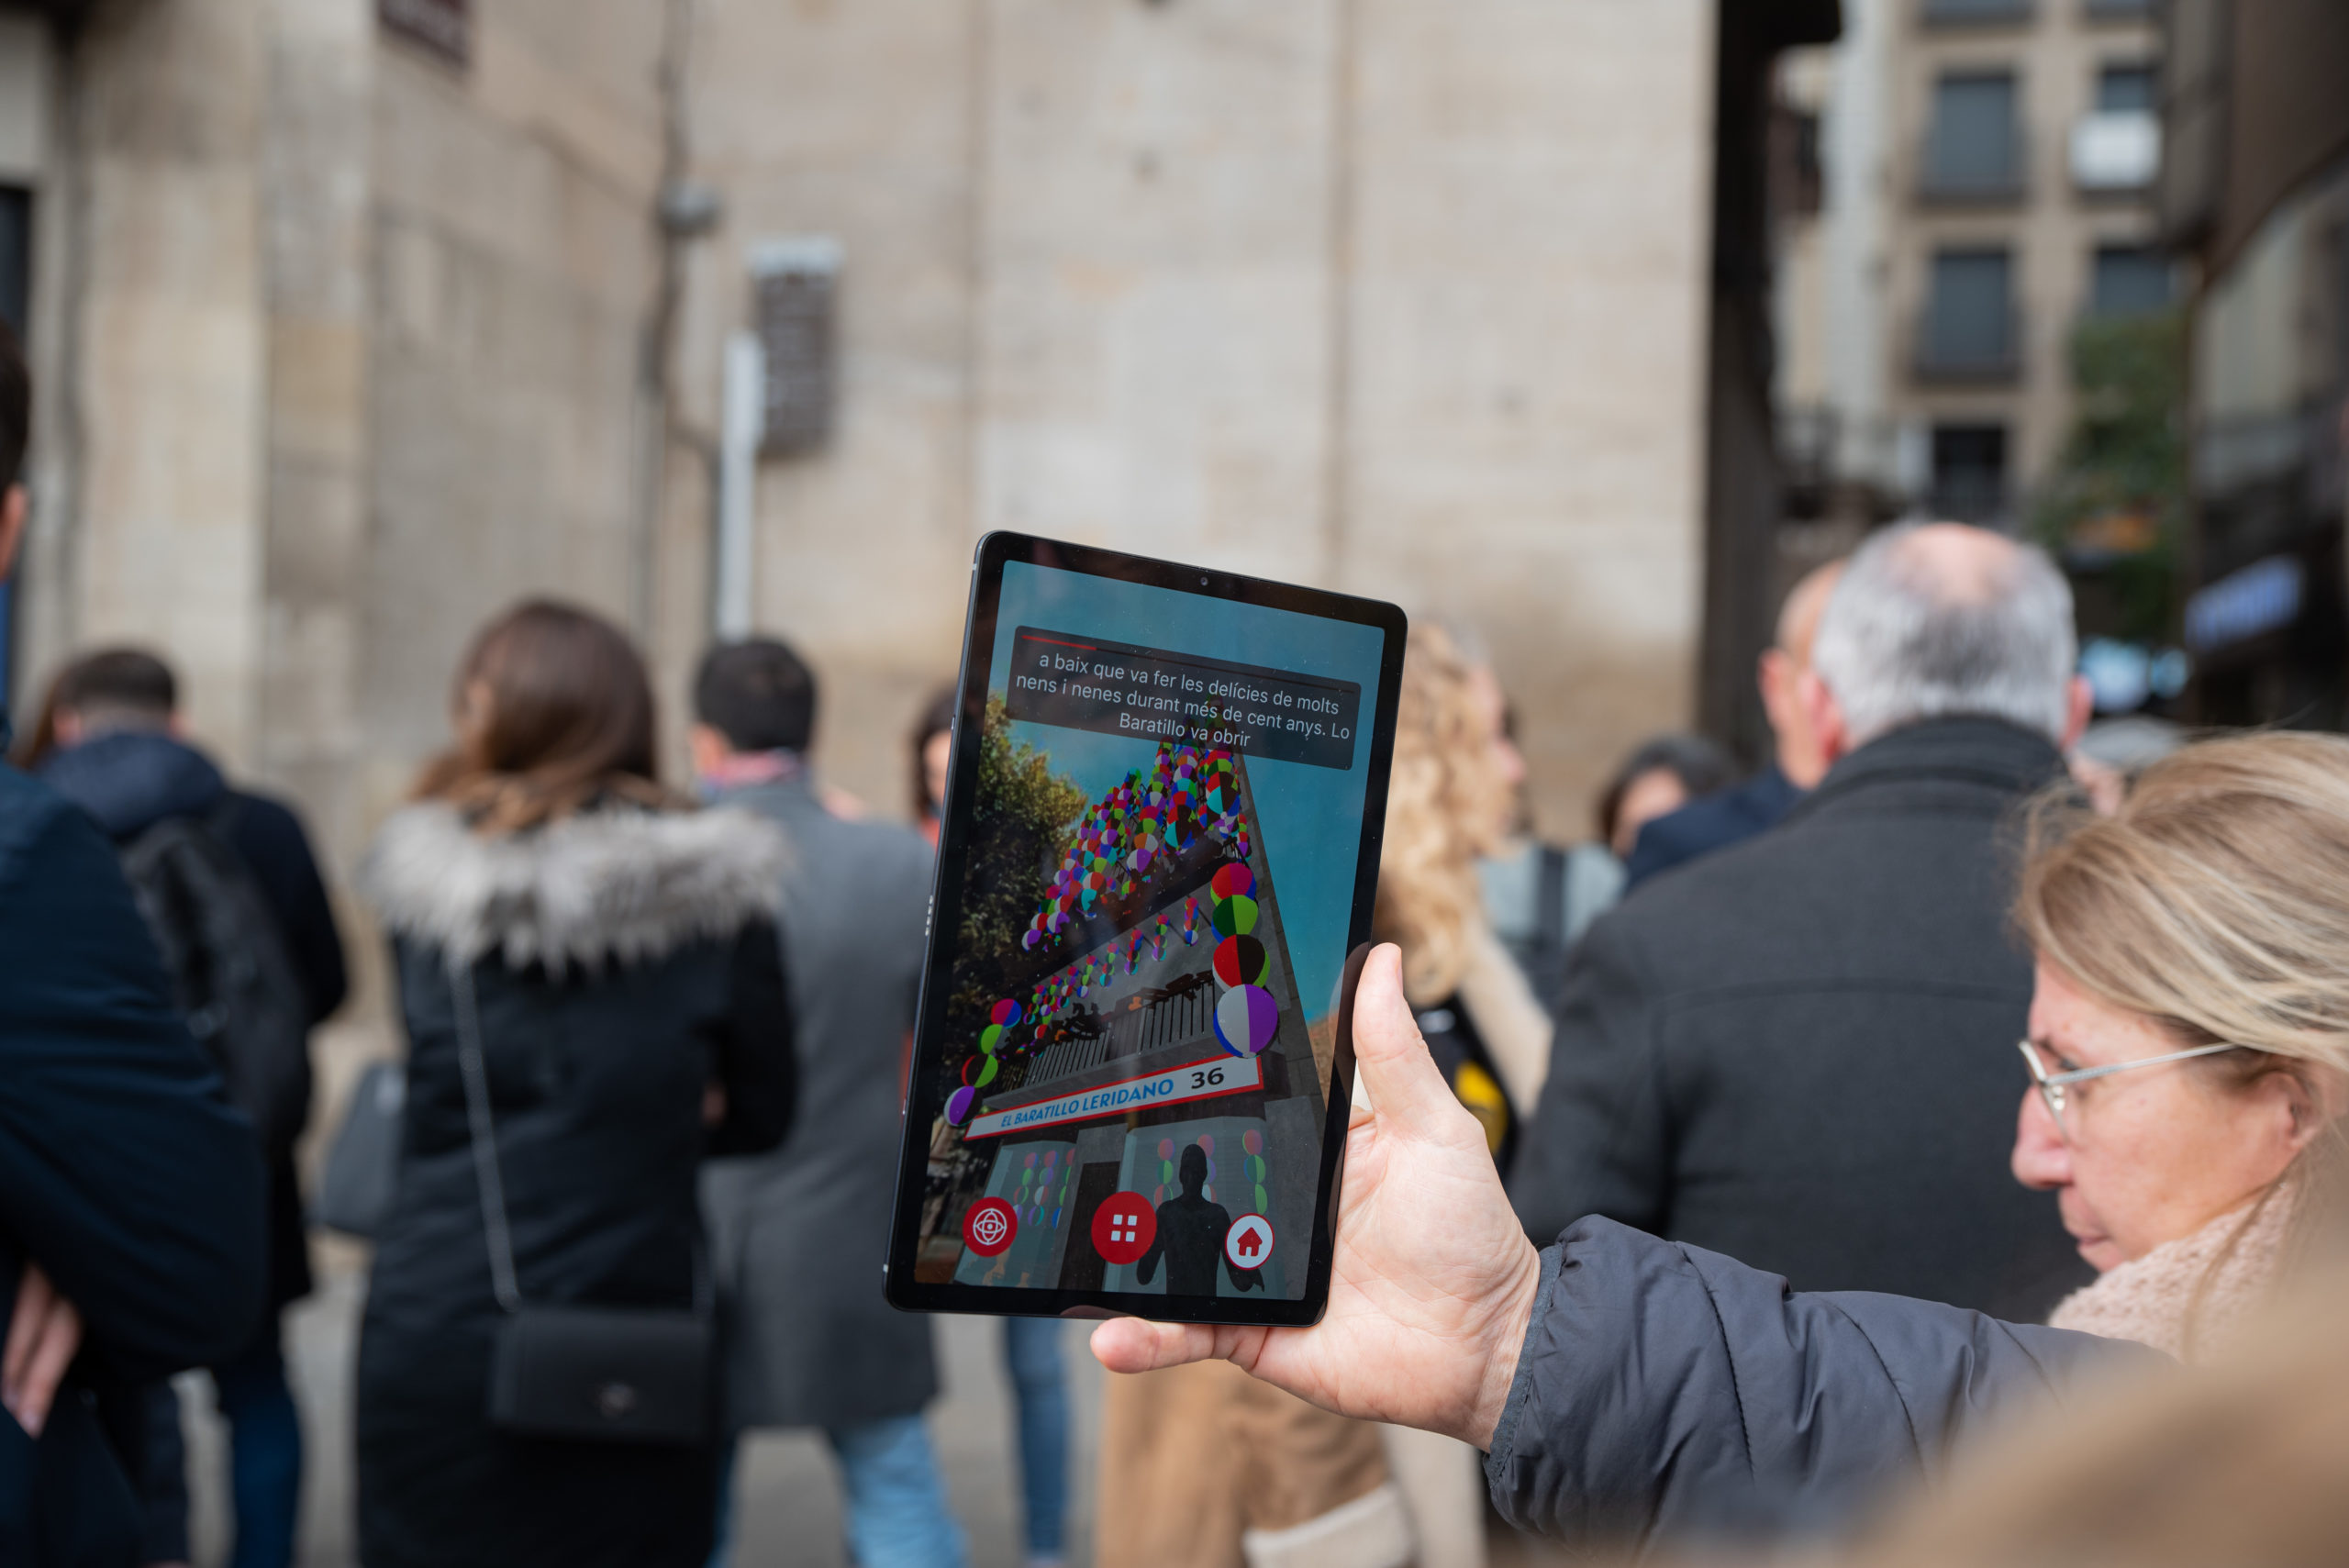 Shops in Lleida offer an immersive experience with augmented reality this Christmas thanks to 5G technology